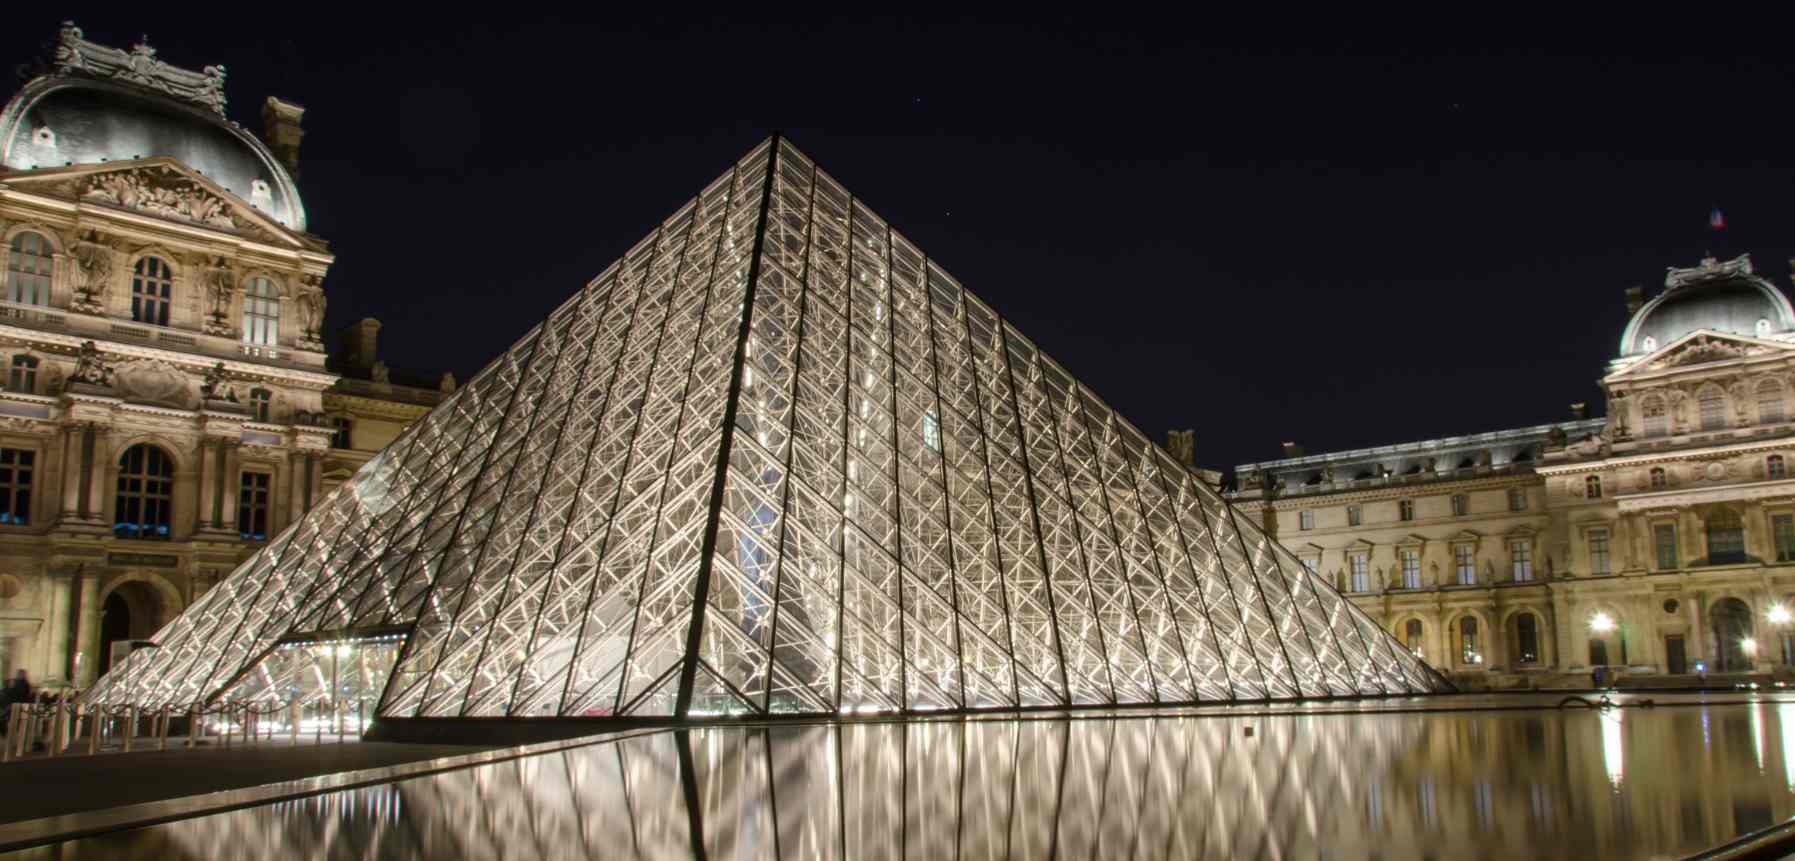 Visit the Louvre Museum